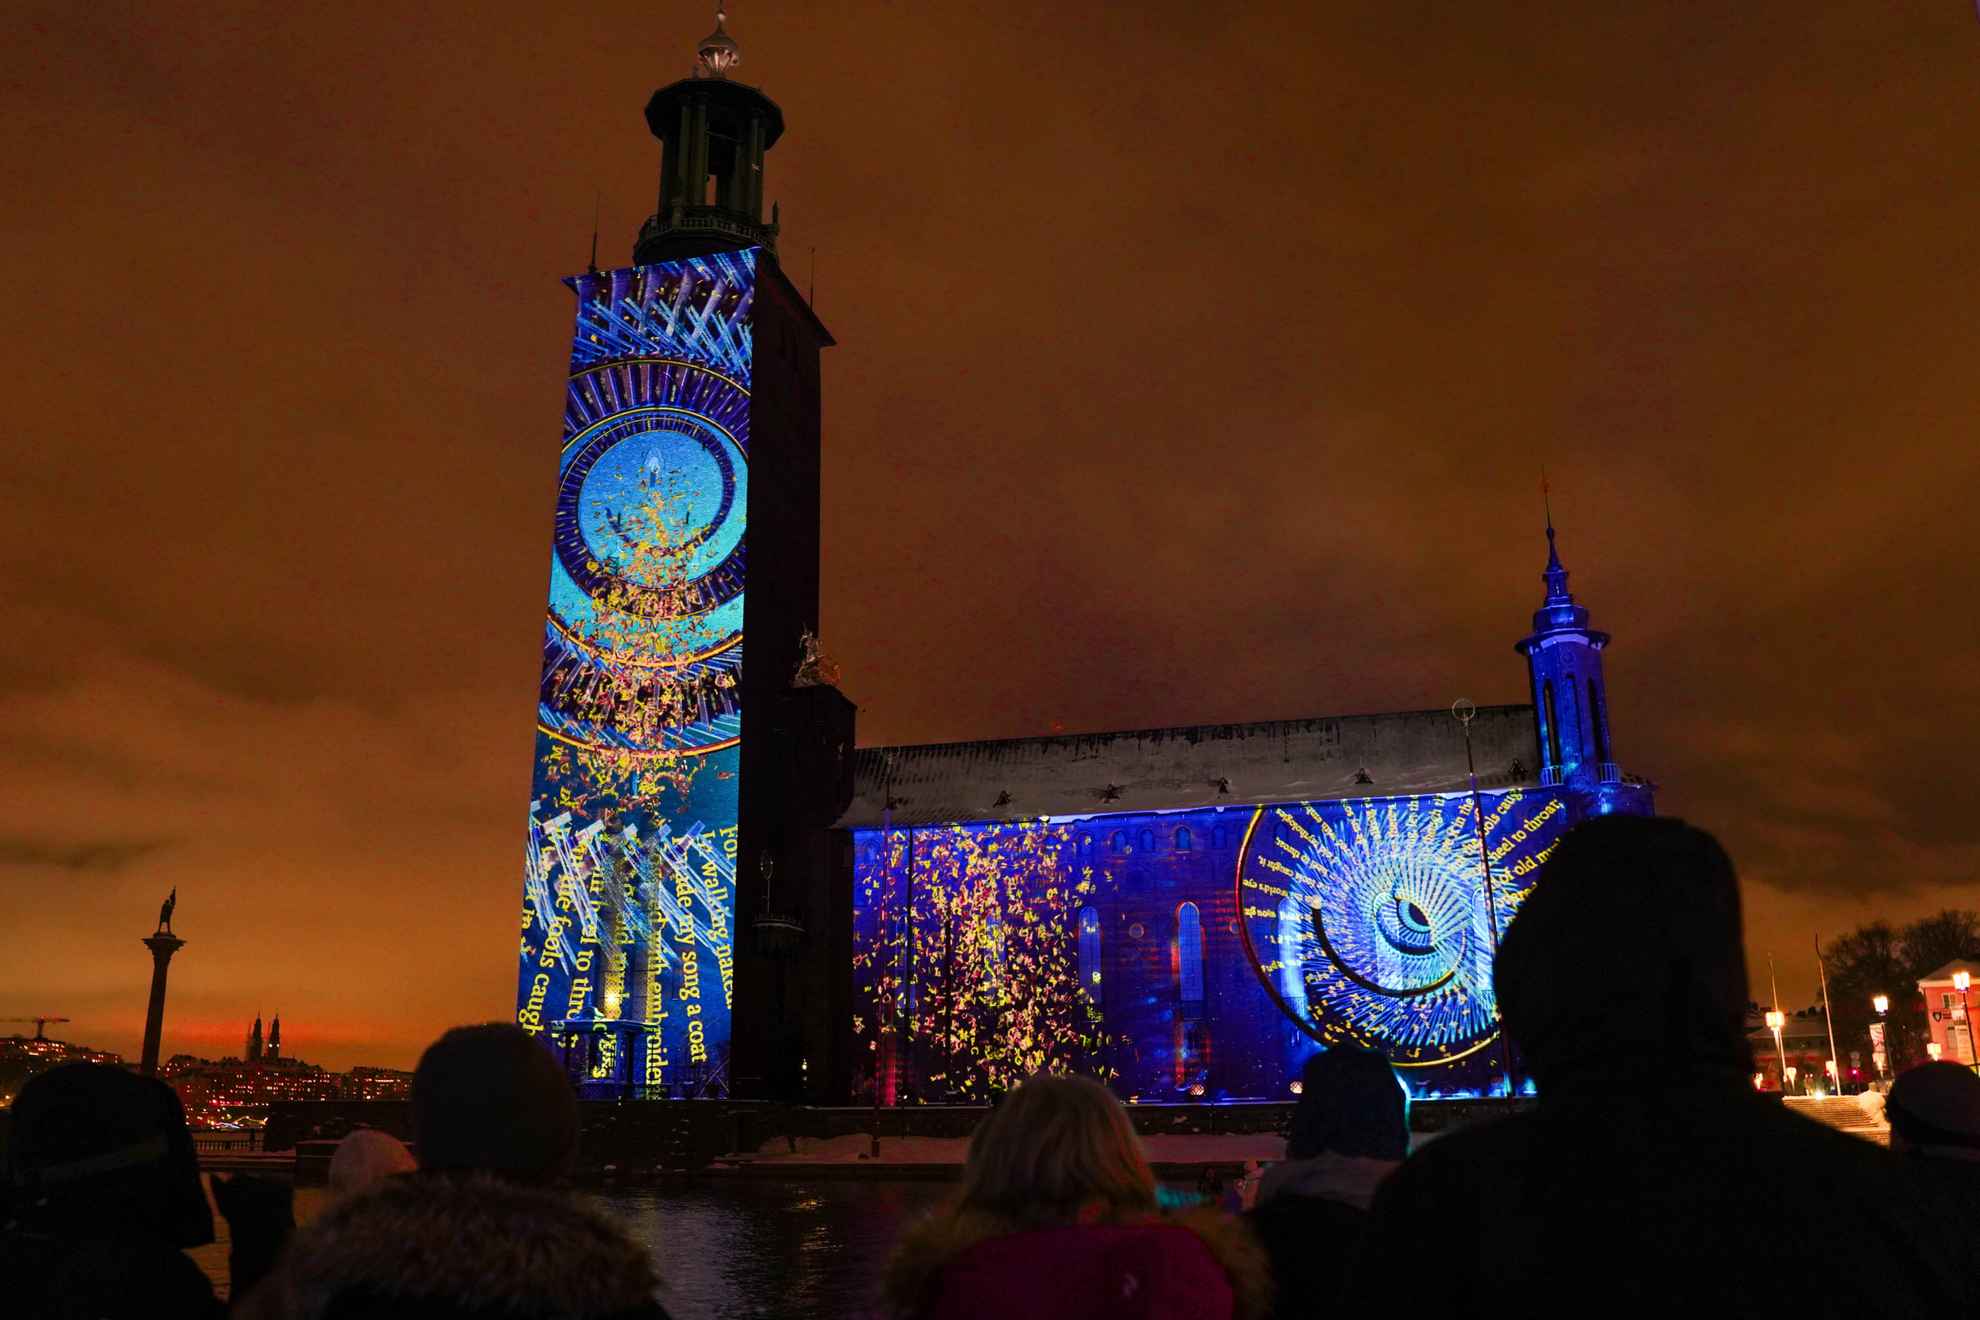 A light installation projecting colorful patterns and historical events on the City Hall in Stockholm, Sweden.